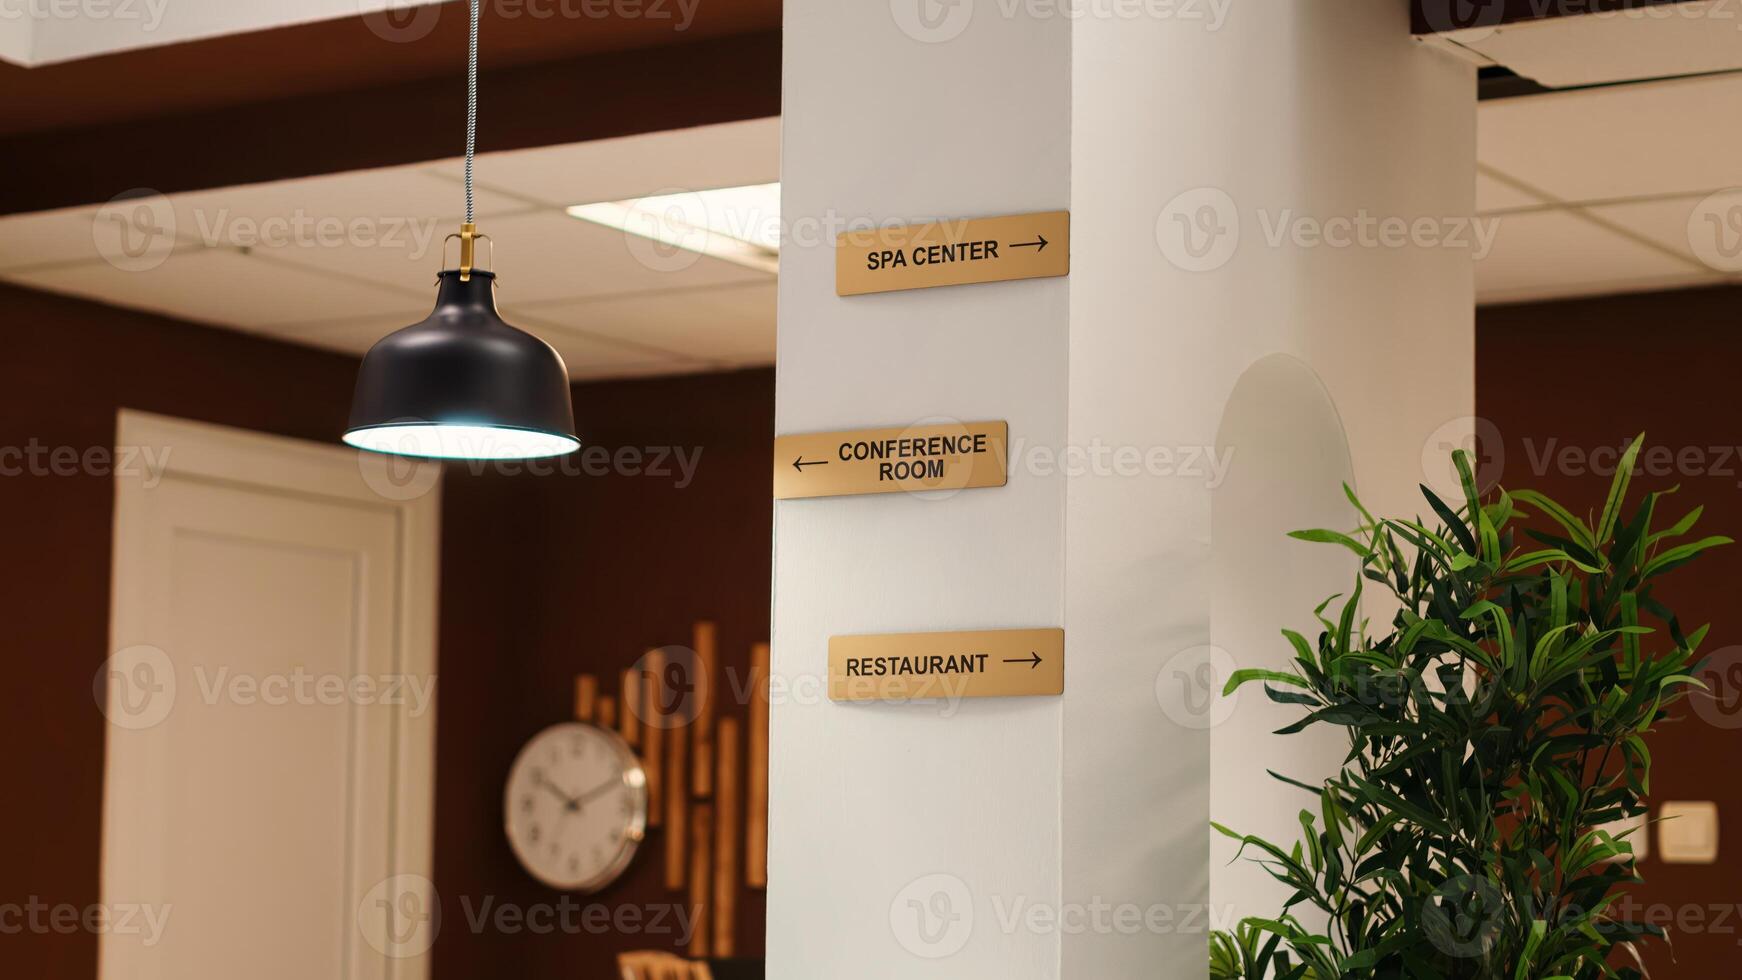 Empty stylish business accommodation lobby interior with deluxe spa center, conference room, and restaurant amenities. Close up of hotel facilities plaque signs on resort foyer wall photo